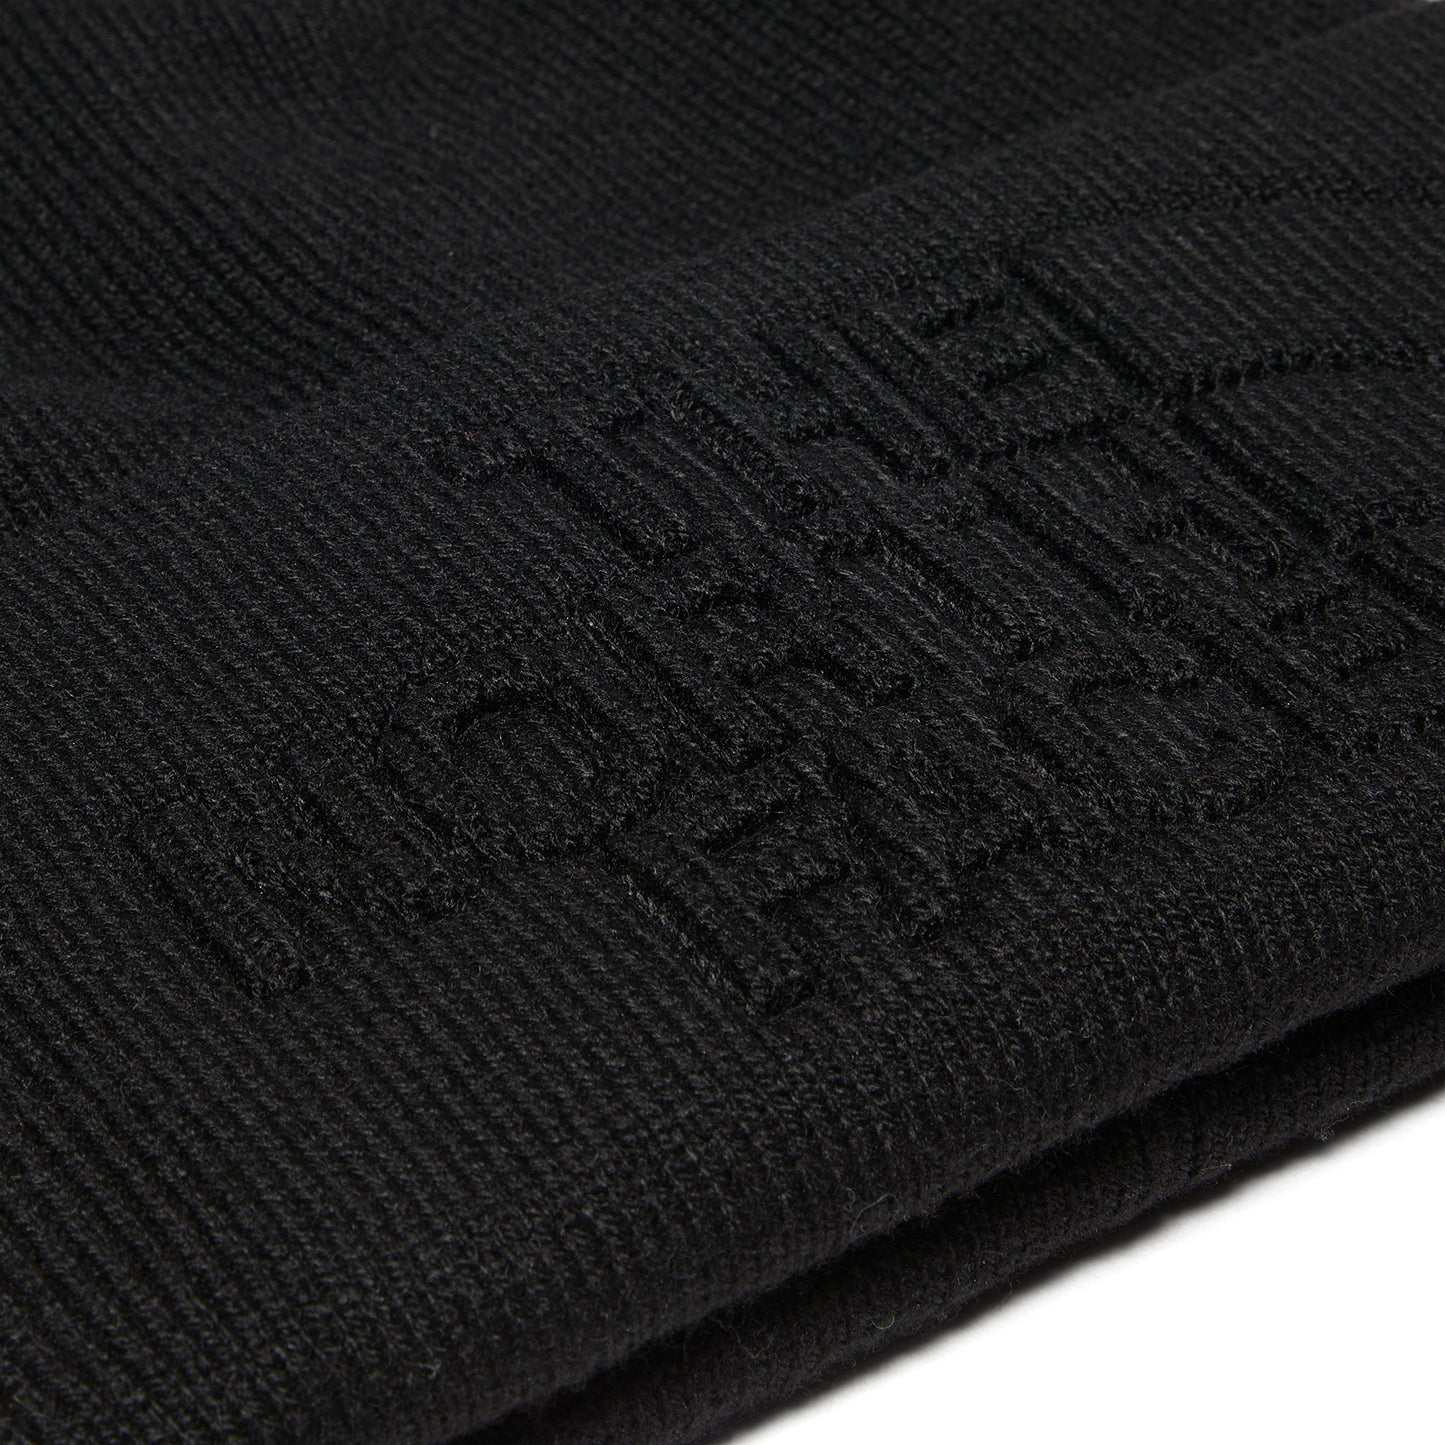 The North Face Urban Embossed Beanie (TNF Black)